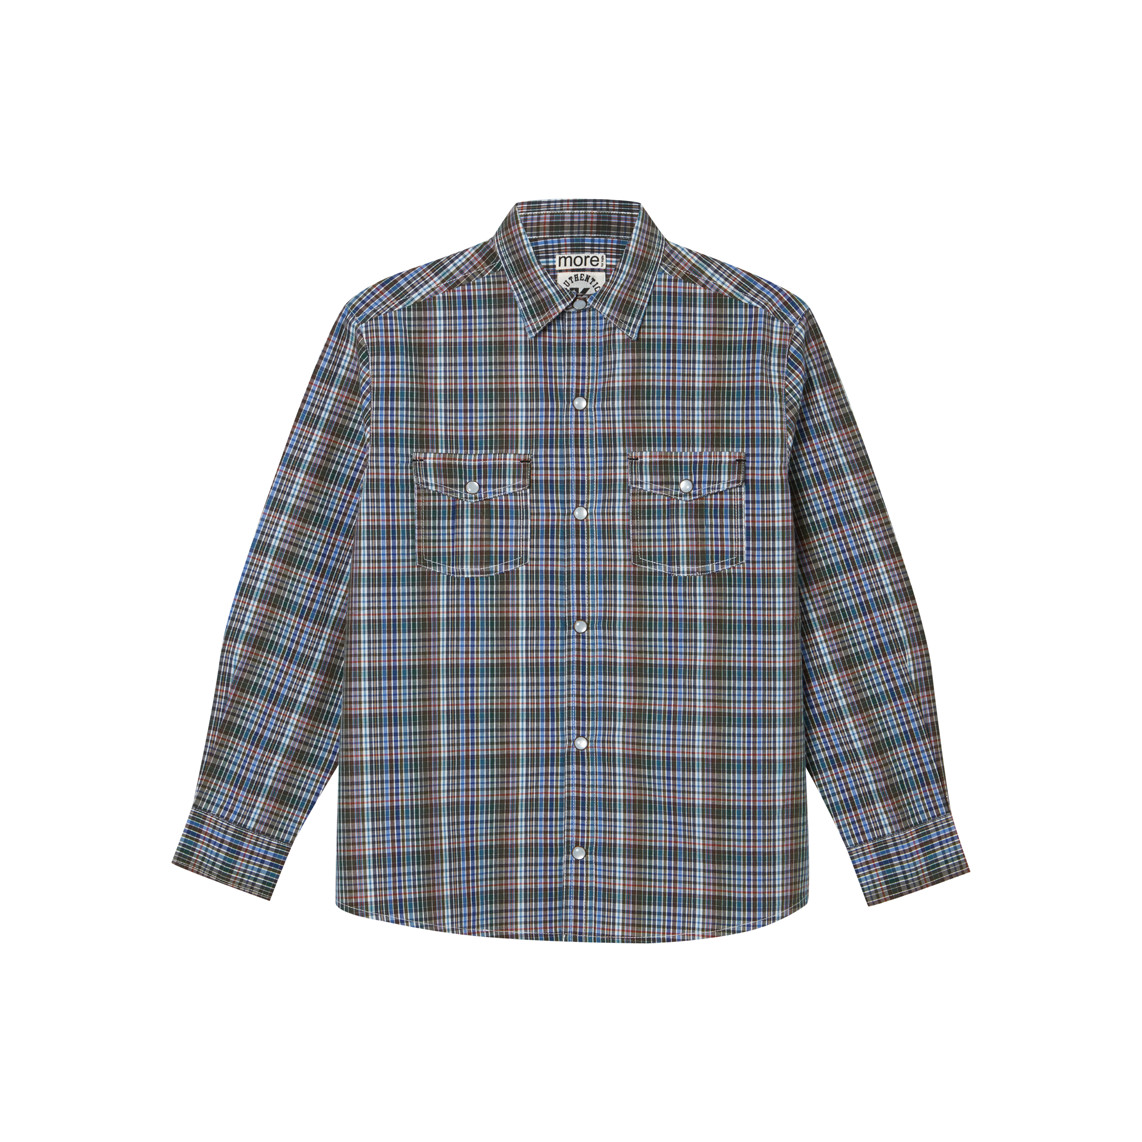 Neutral Plus Size, Generous Fit, Check Shirt for Boys | 28 - 42 inch chest